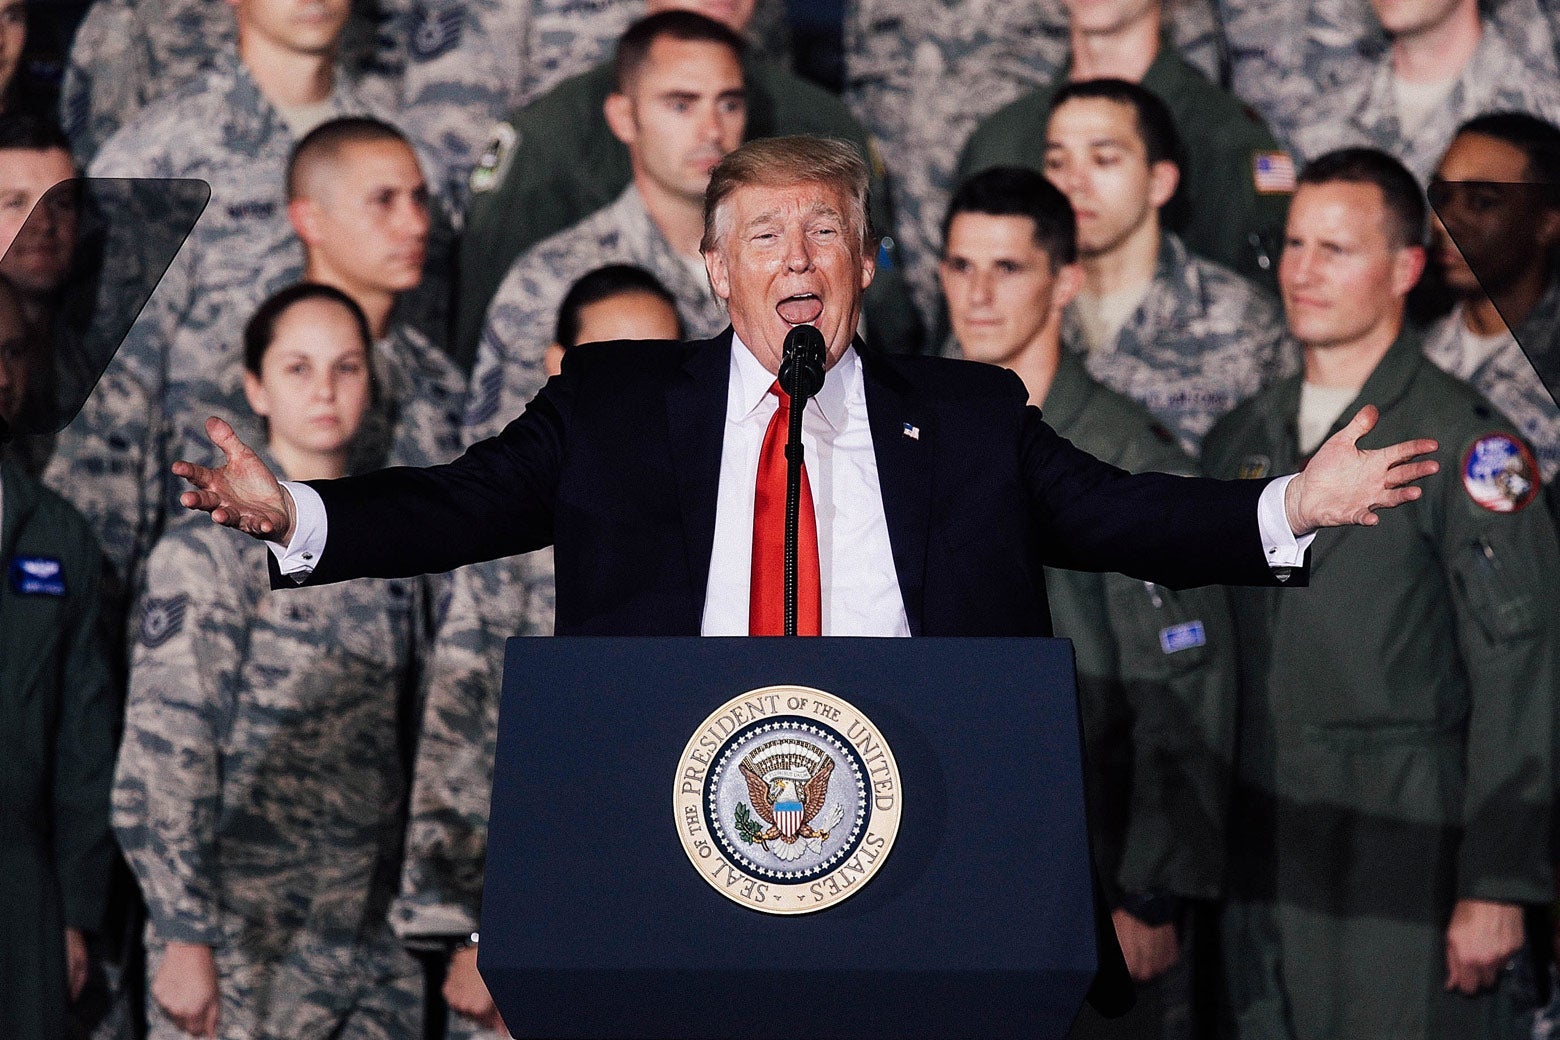 U.S. President Donald Trump speaks to Air Force personnel on Sept. 15, 2017 at Joint Base Andrews in Maryland.